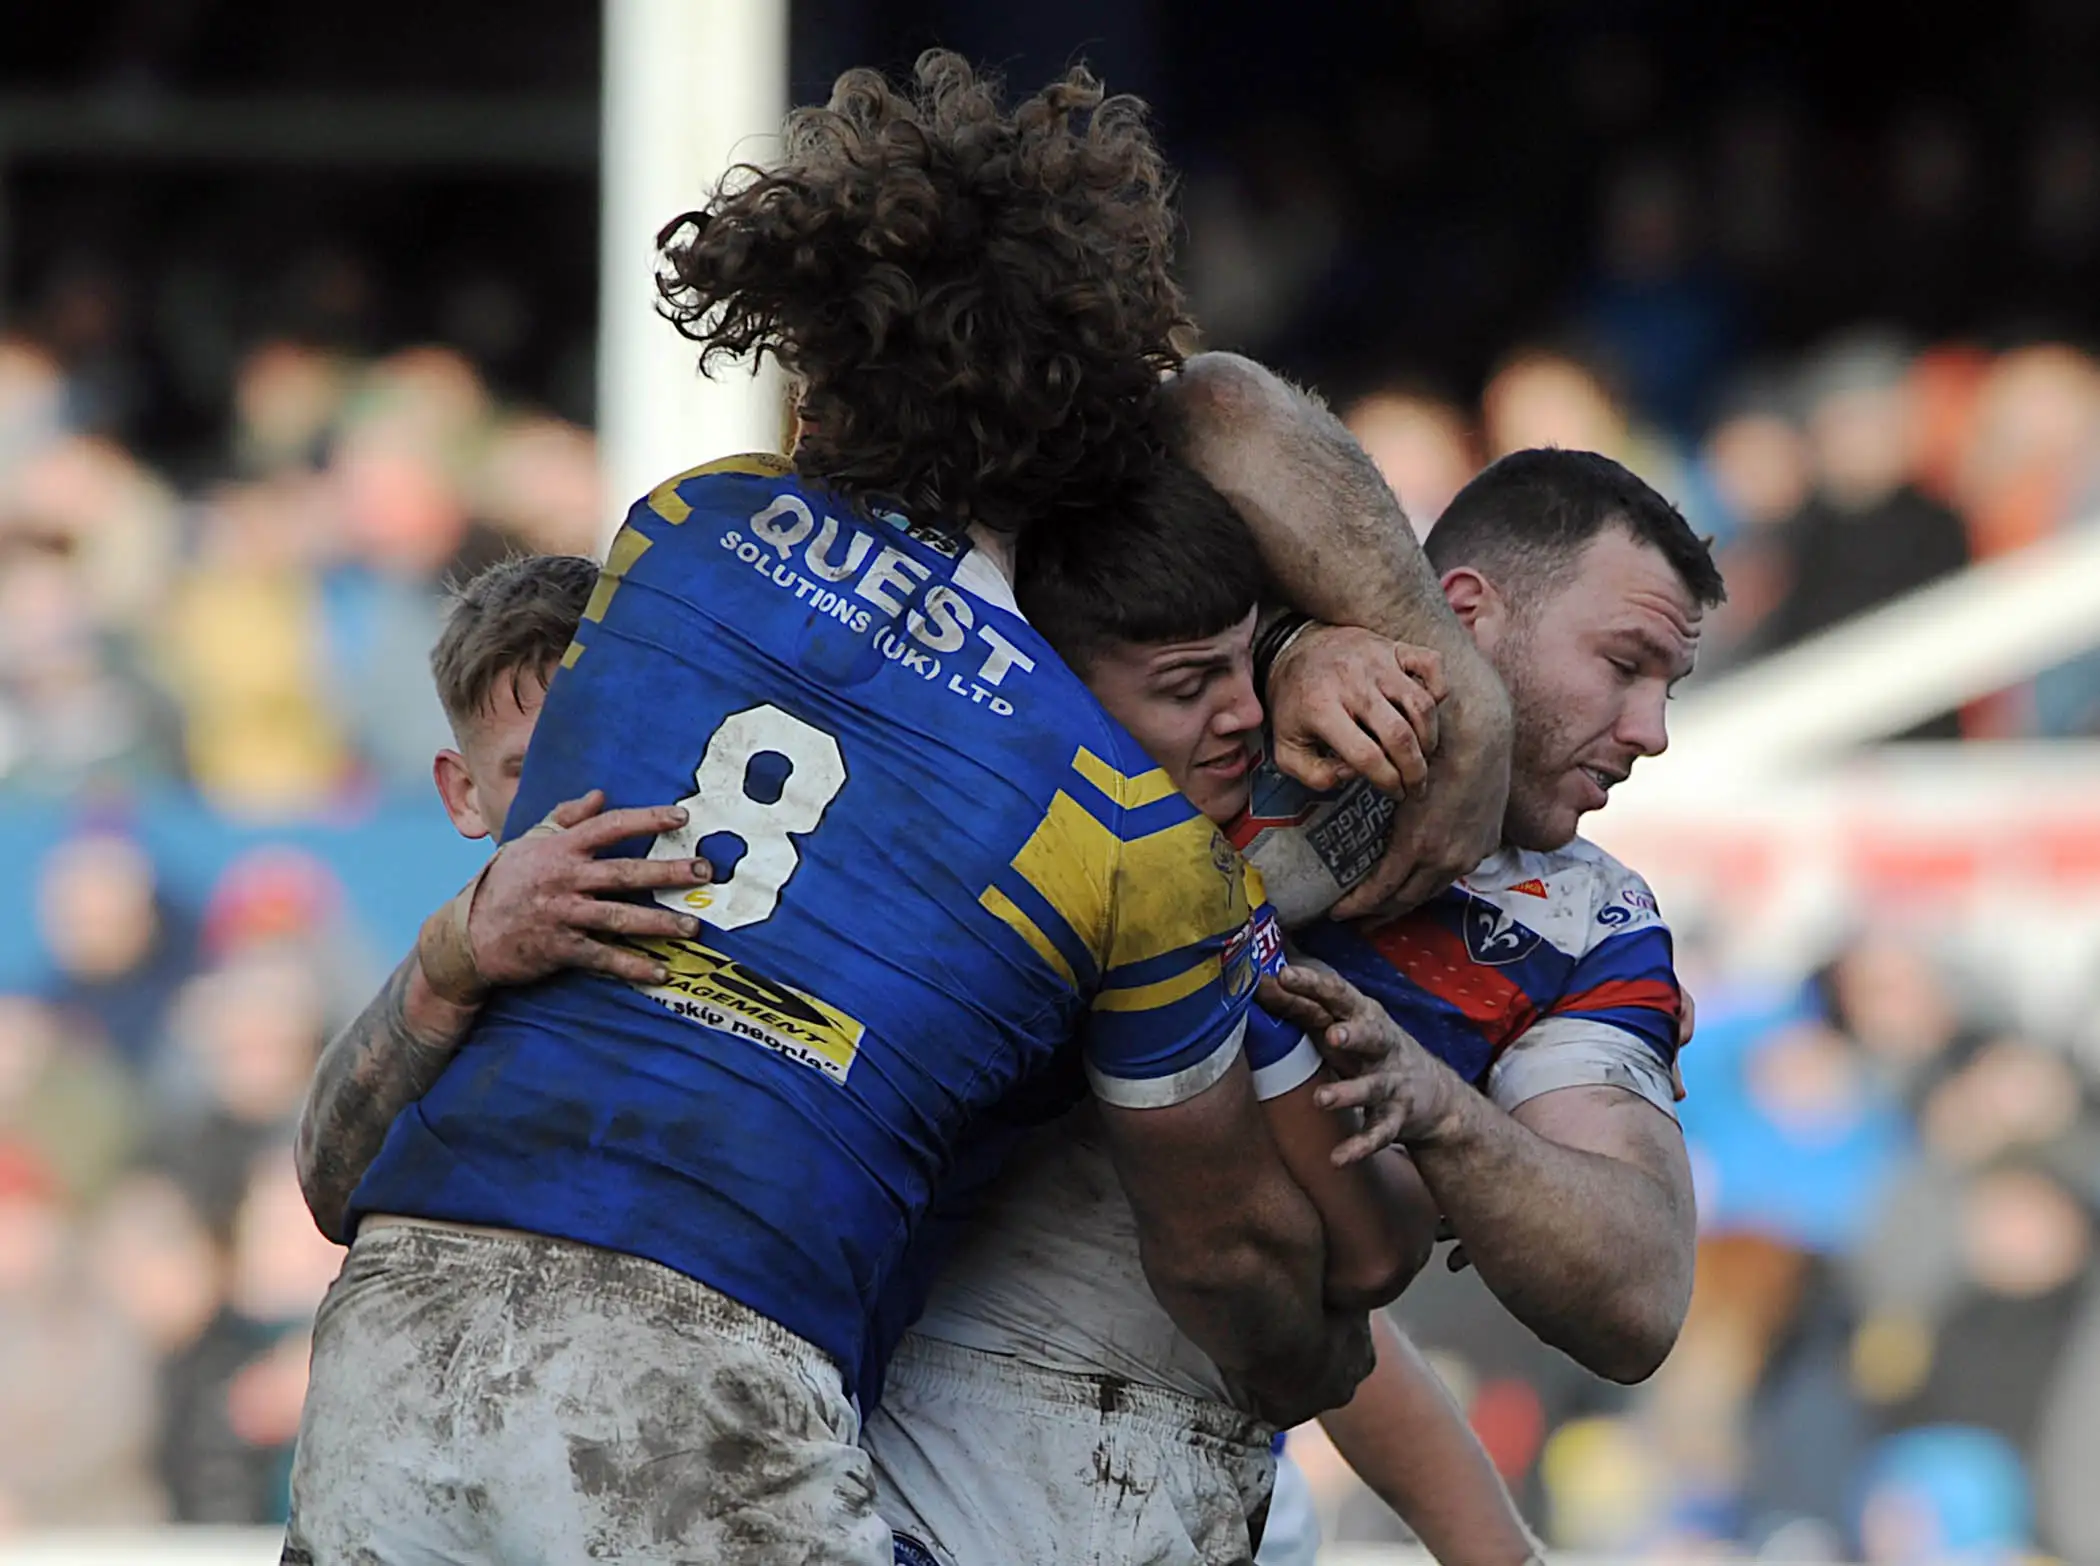 Keegan Hirst extends stay at Wakefield